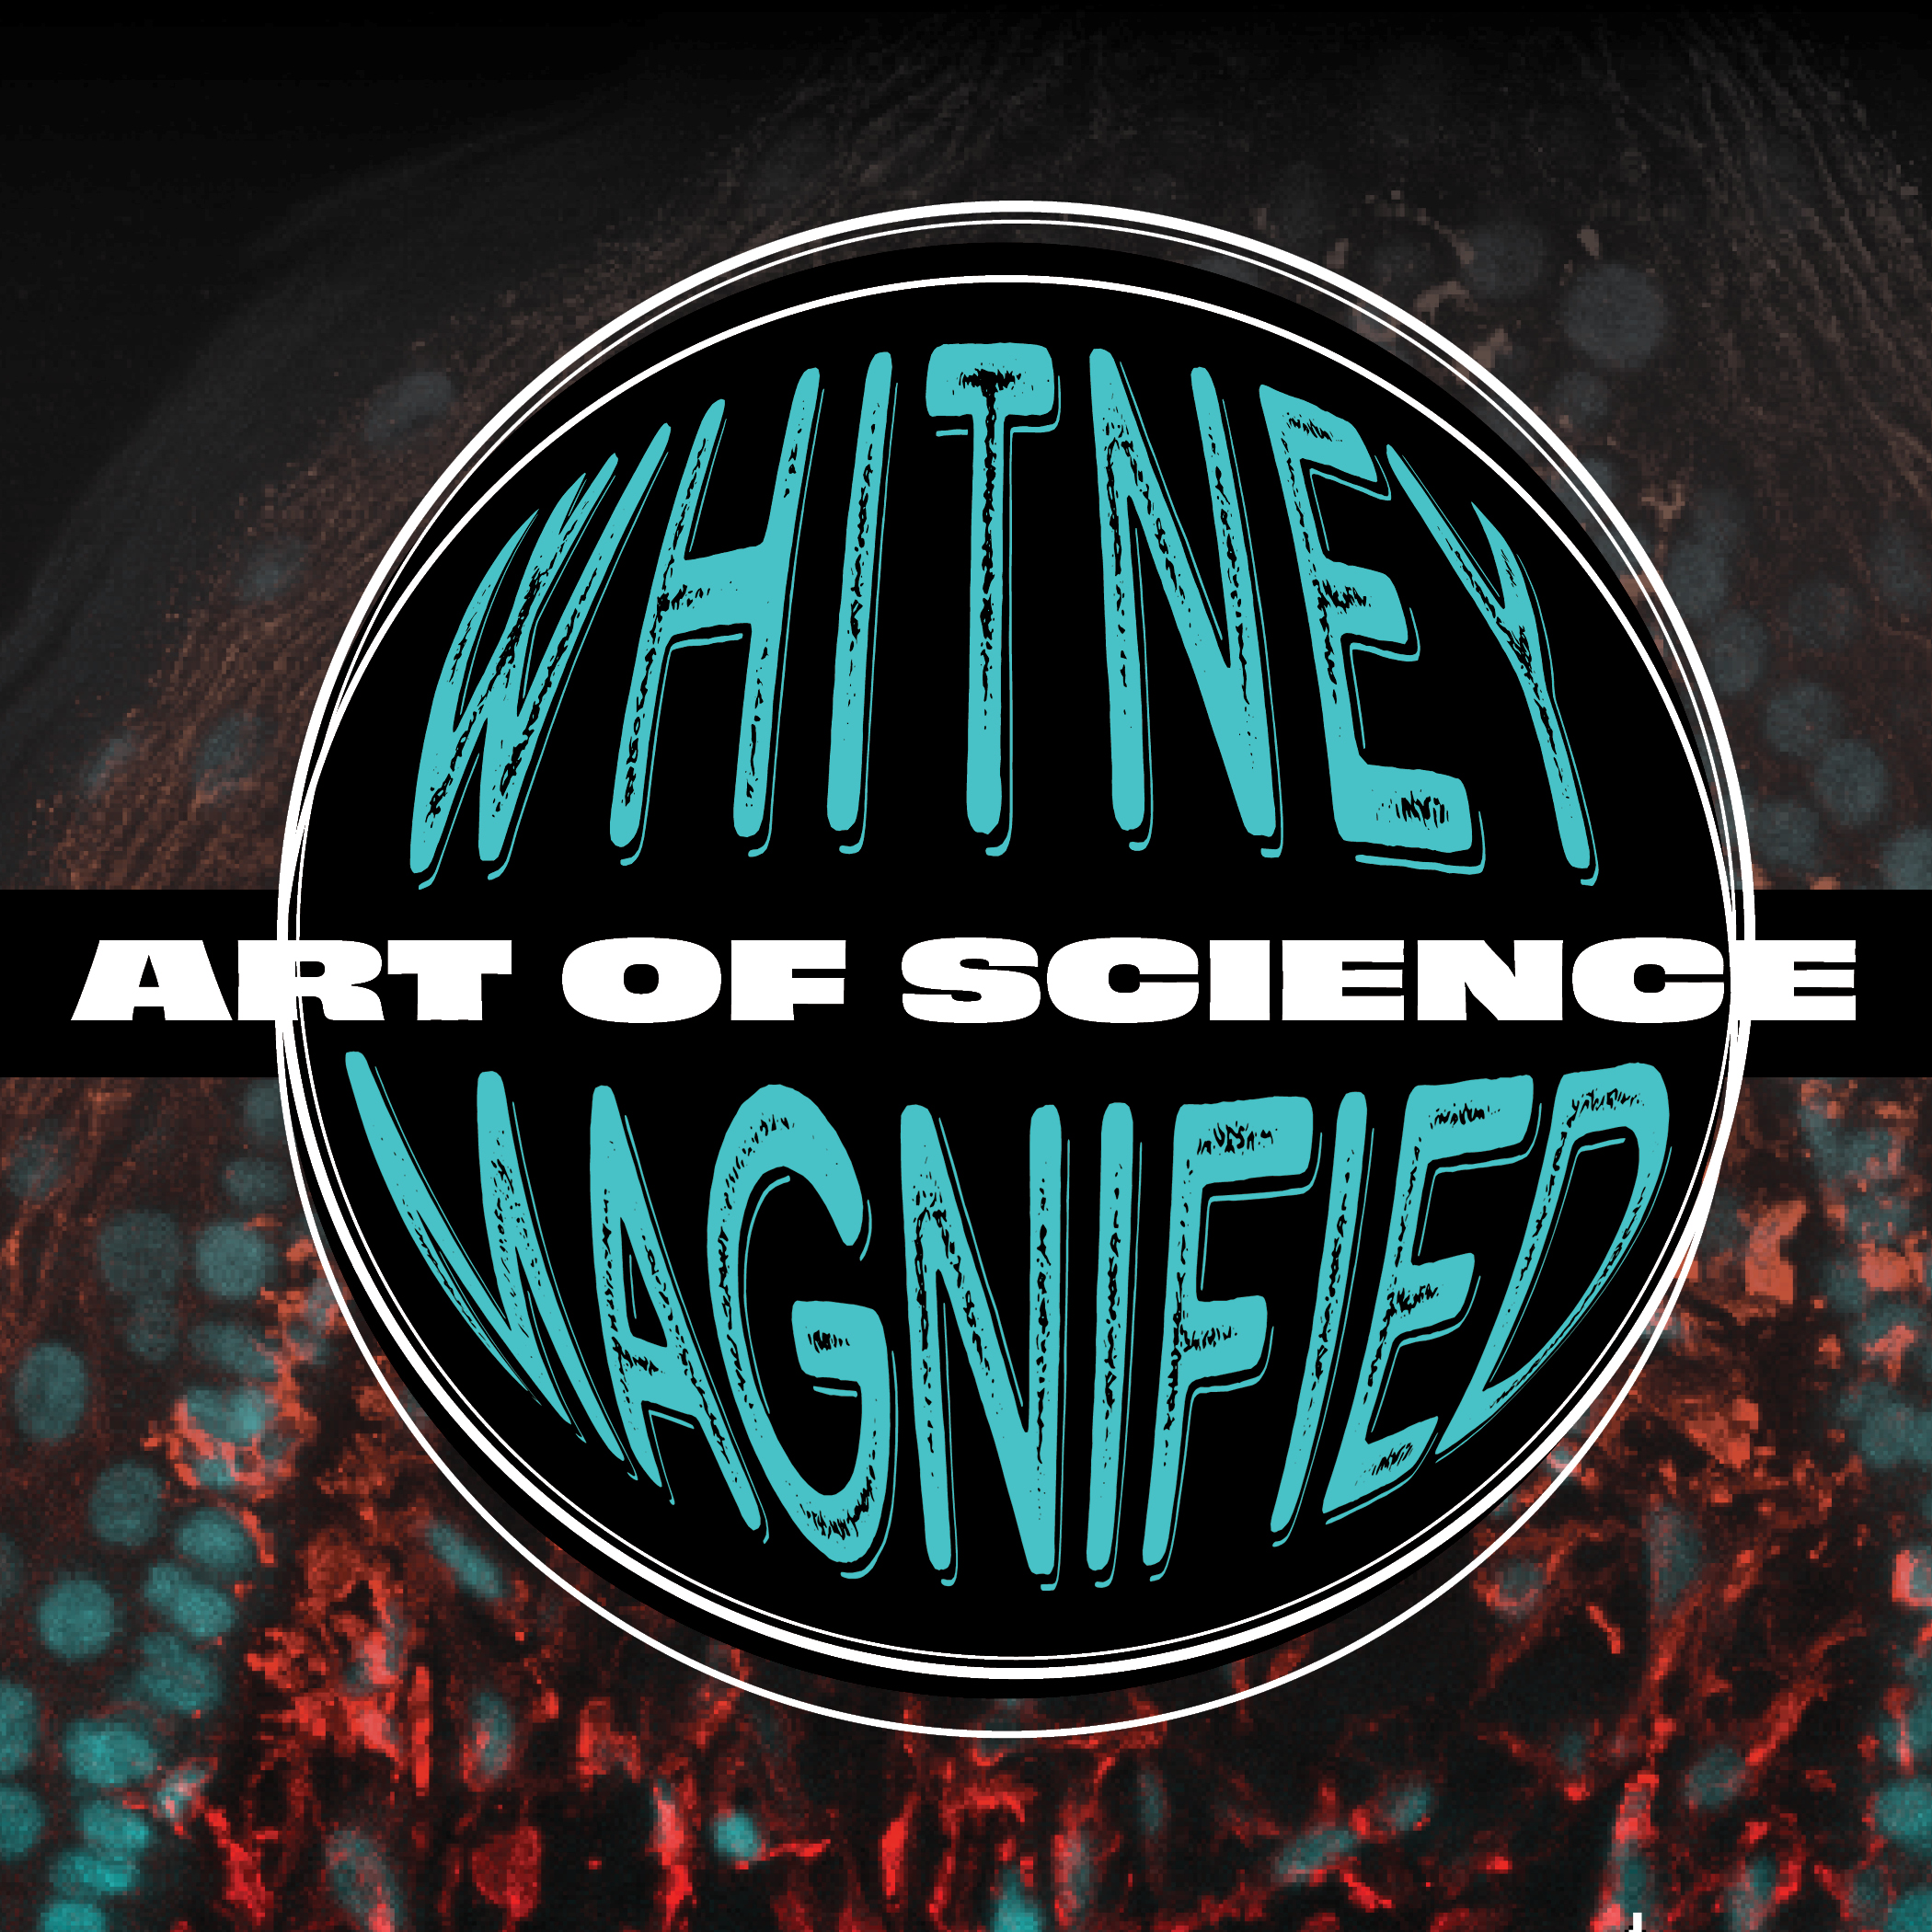 Join us December 8 for Whitney Magnified - Art of Science